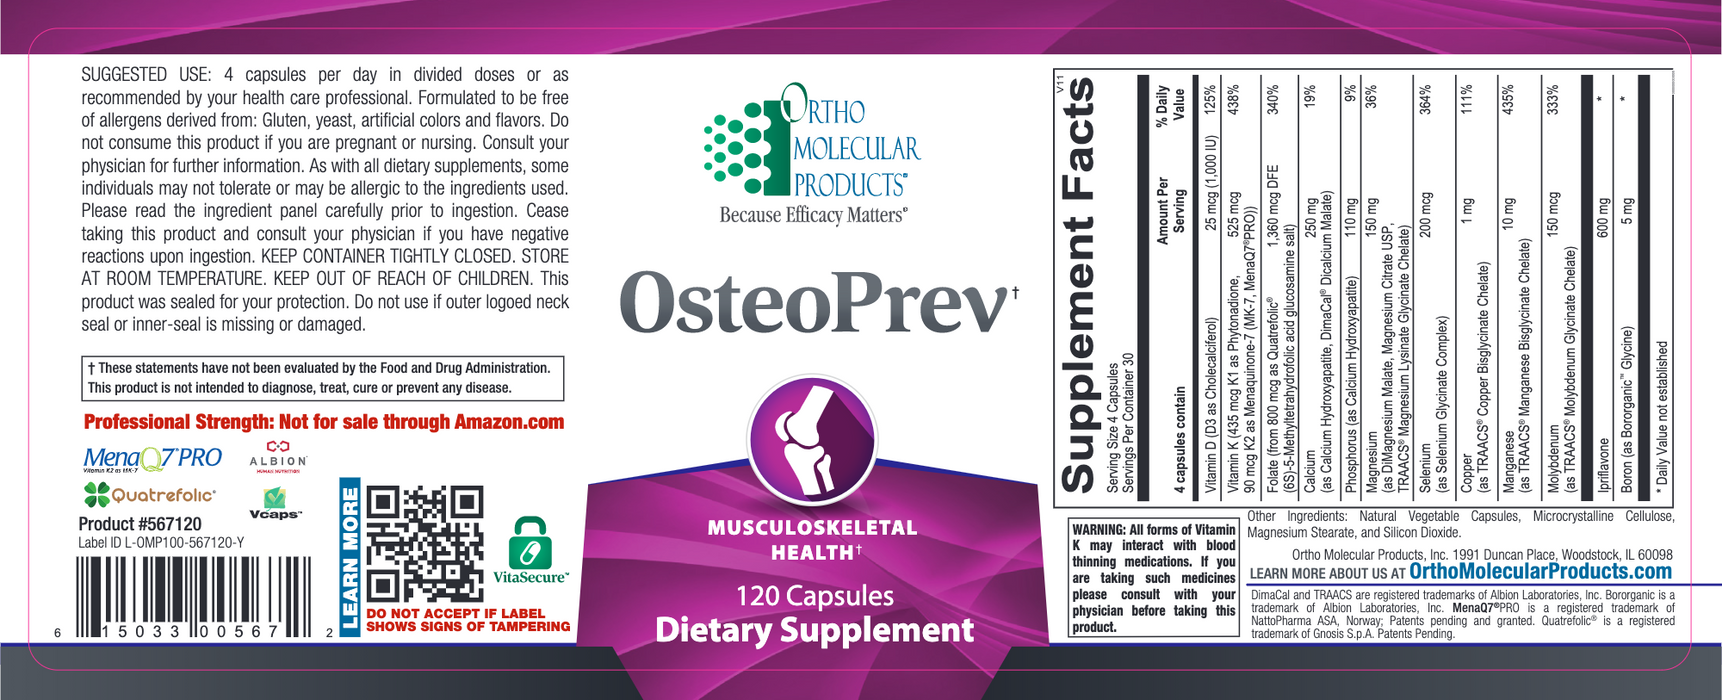 OsteoPrev (120 Capsules)-Vitamins & Supplements-Ortho Molecular Products-Pine Street Clinic